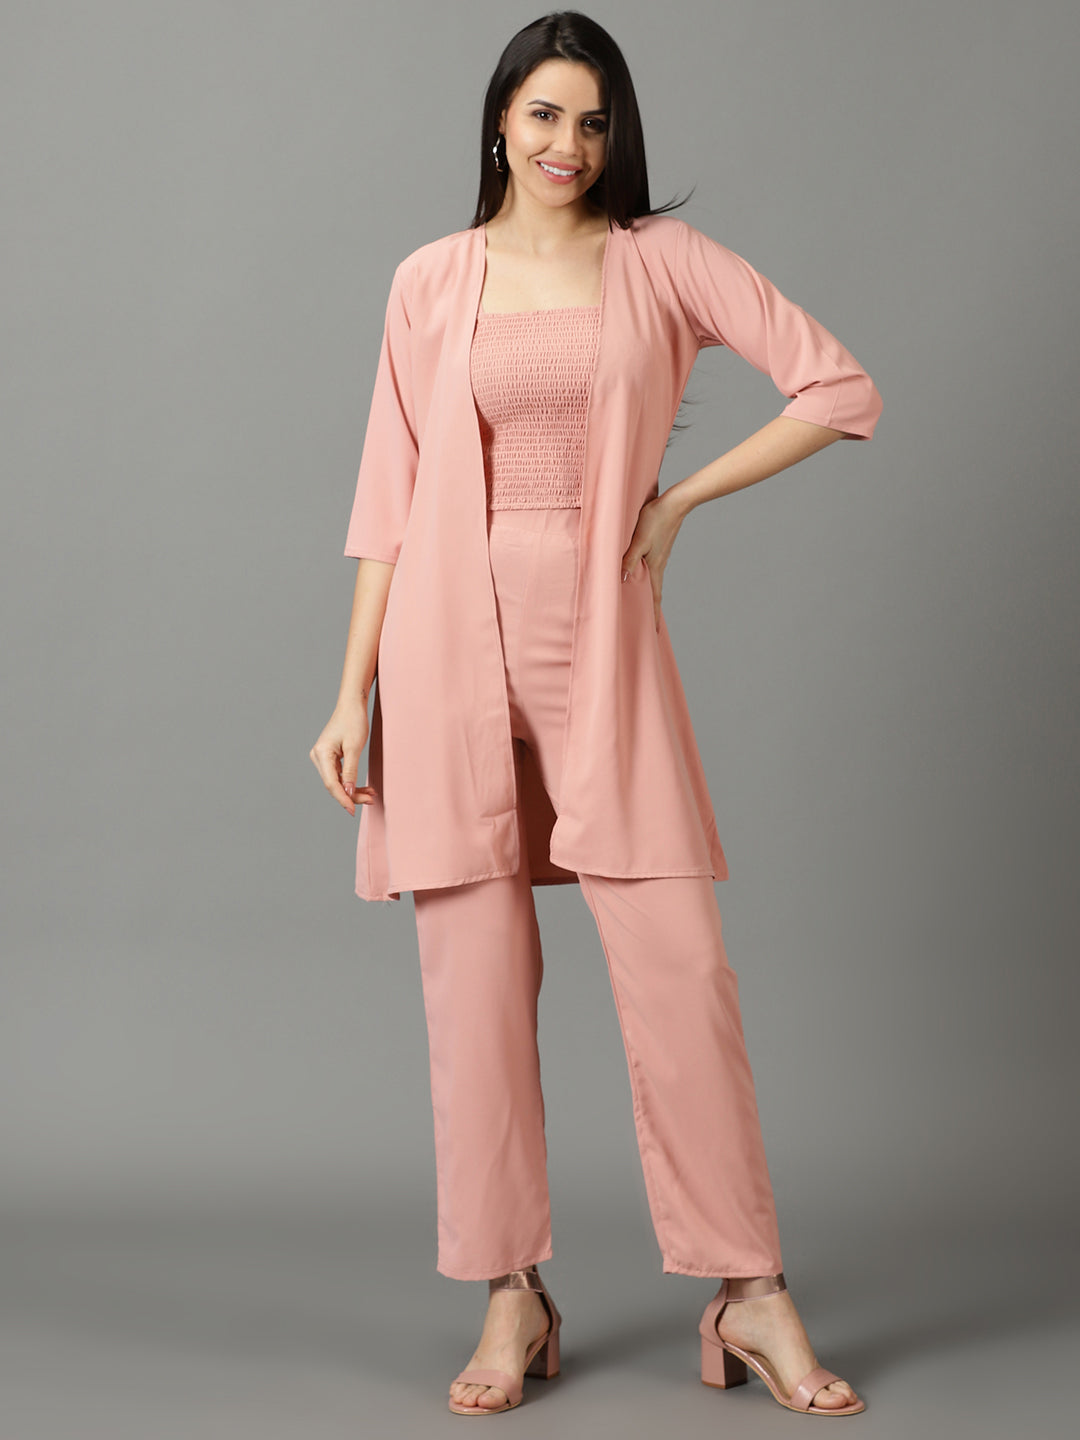 Women's Pink Solid Co-Ords